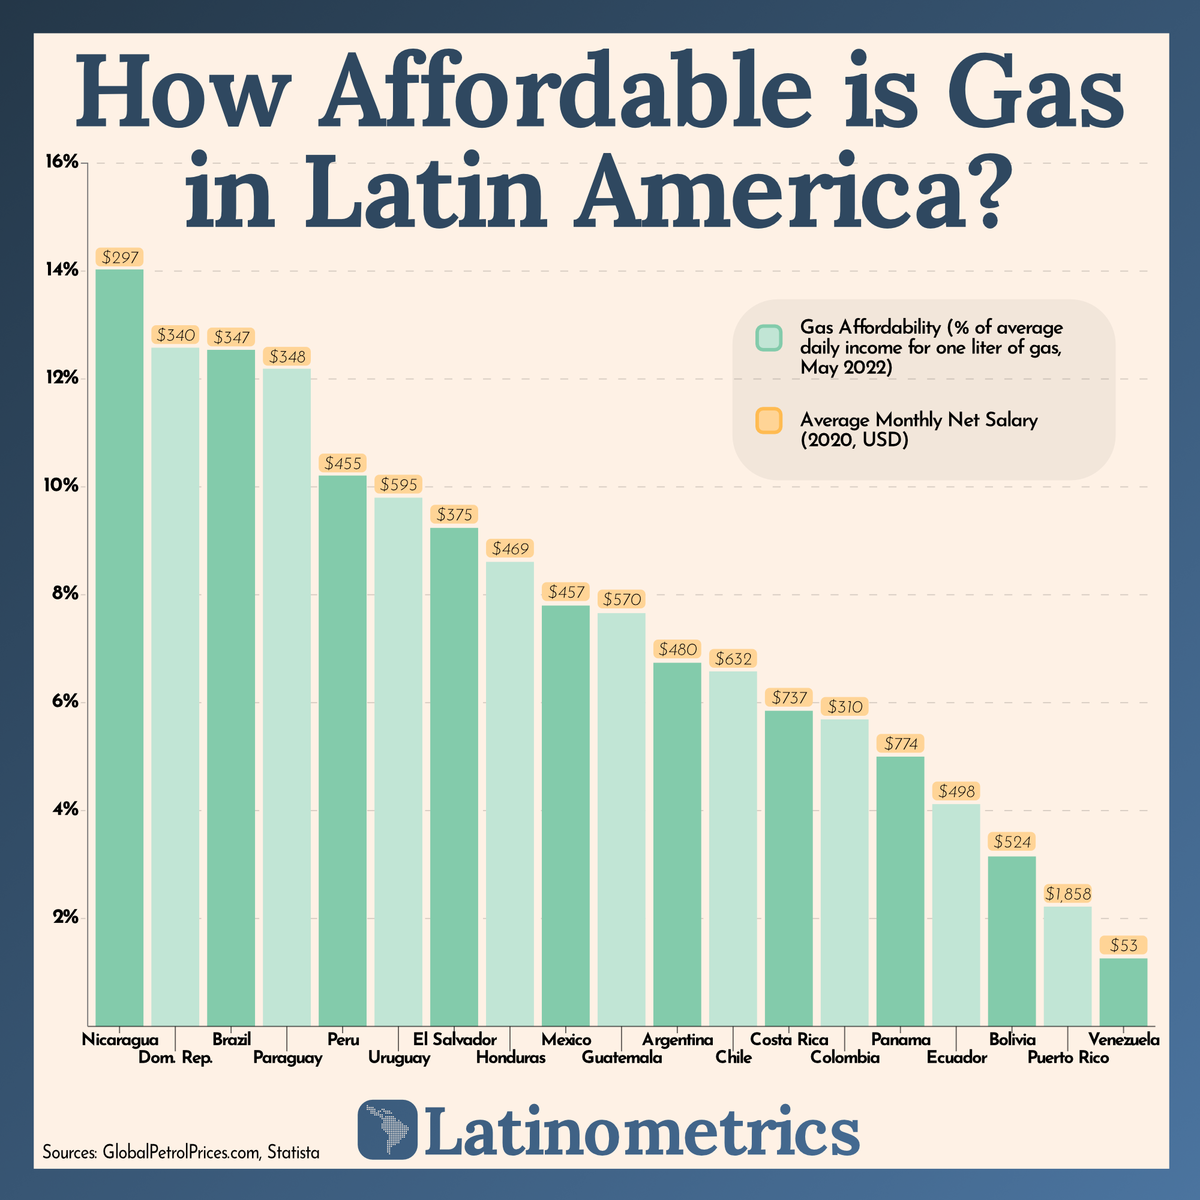 Comparing how affordable gas is across Latin America